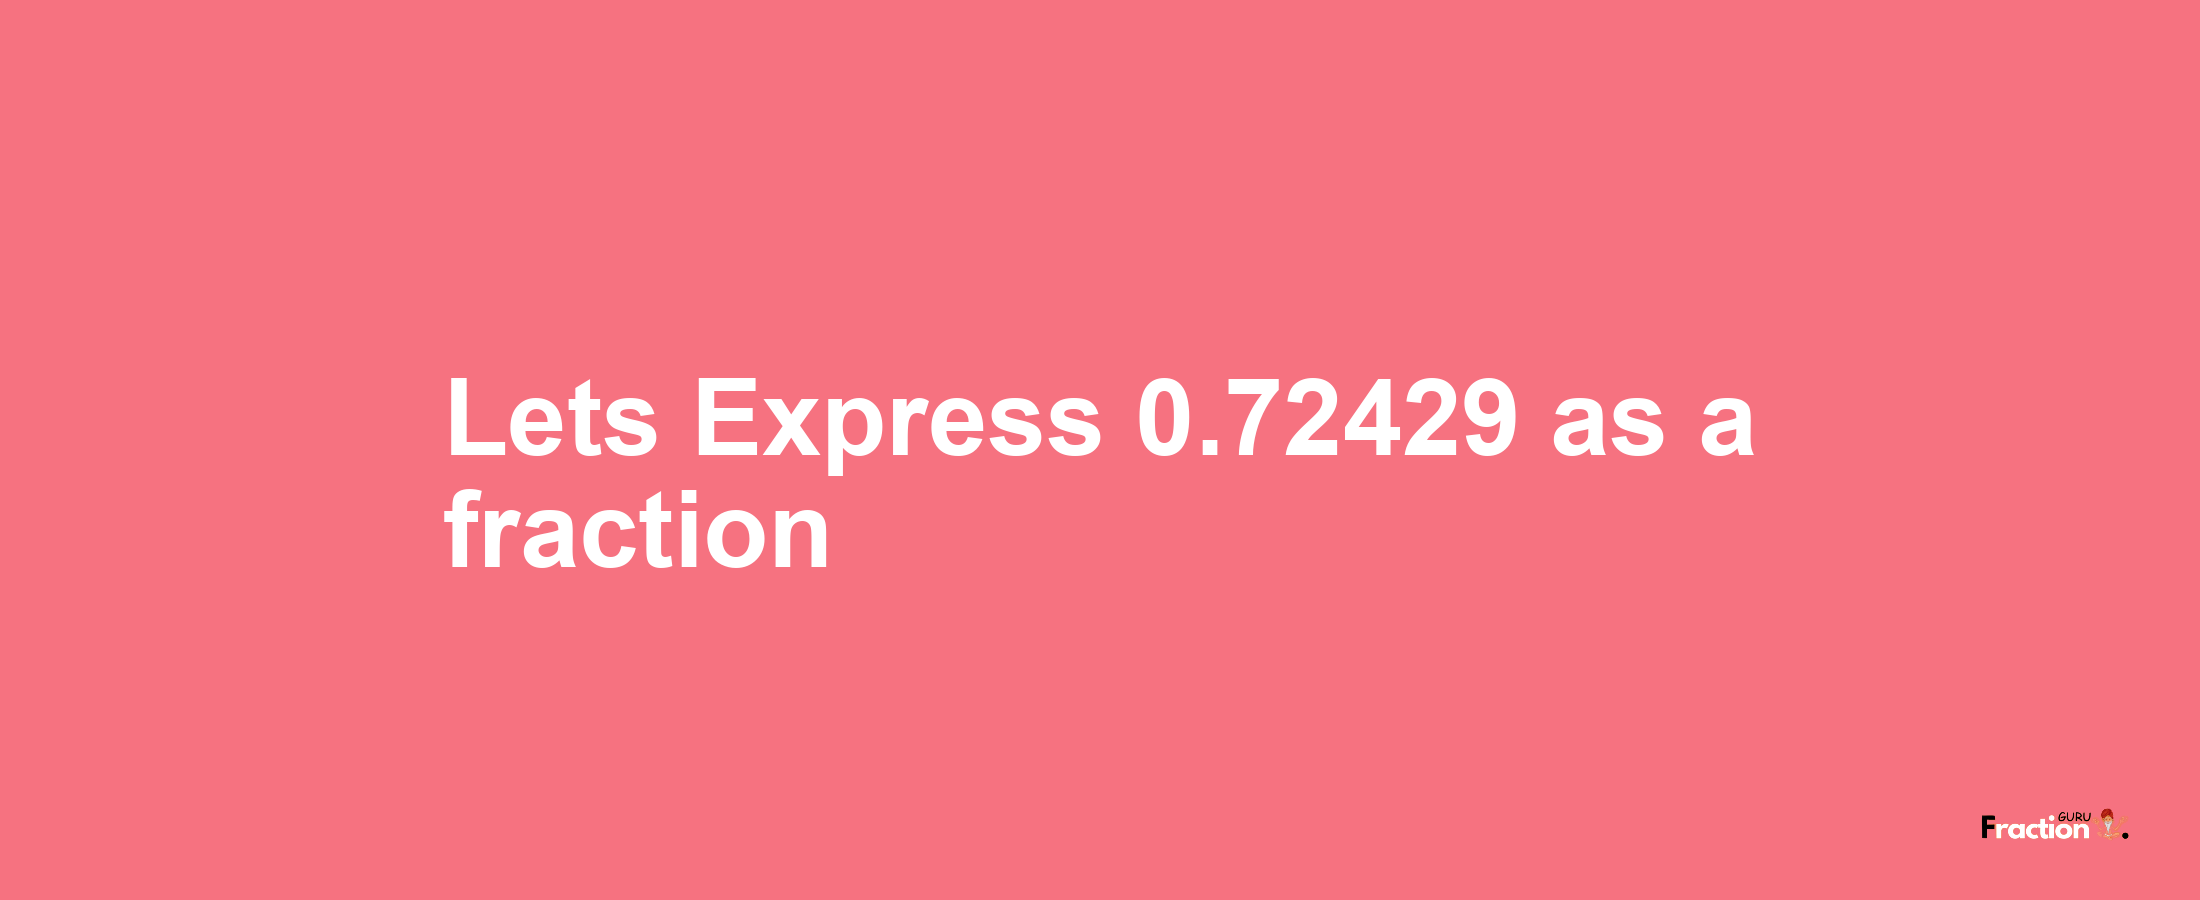 Lets Express 0.72429 as afraction